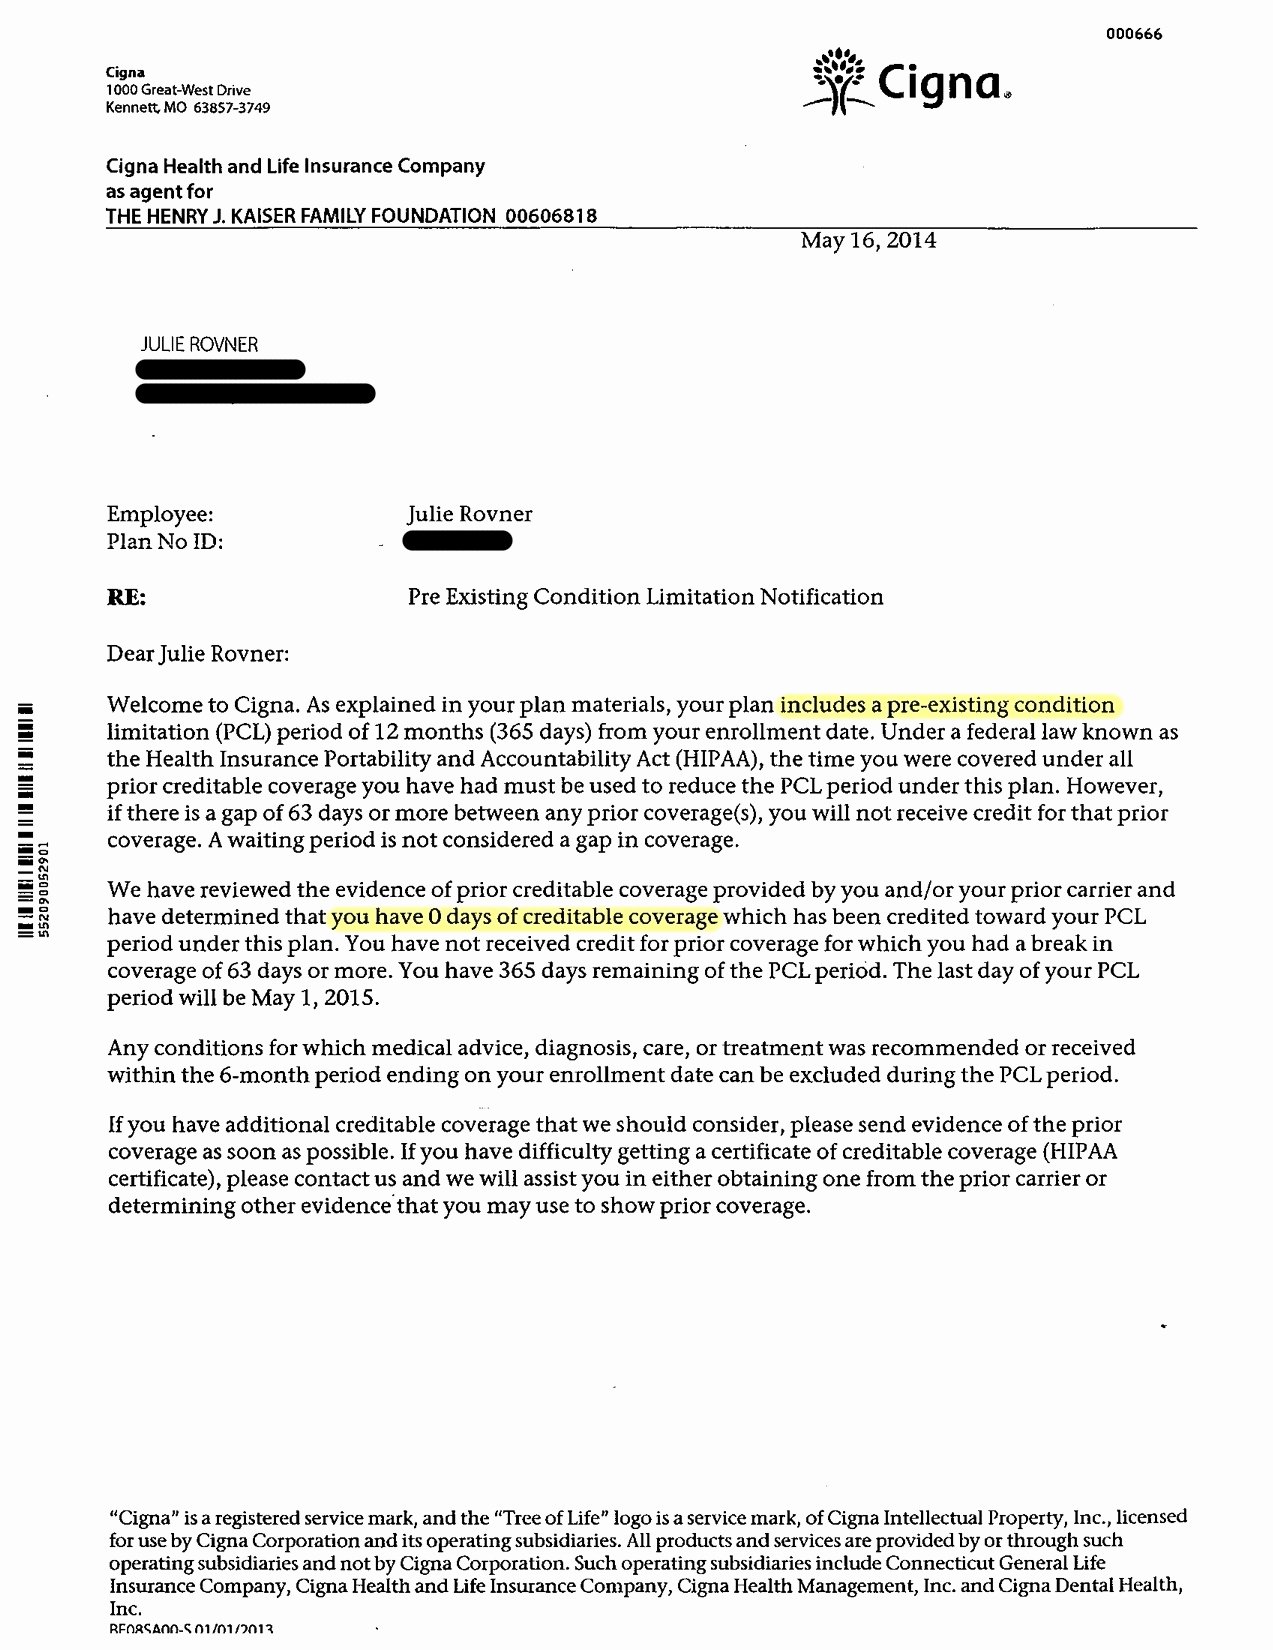 Fake Proof Of Insurance Template Best Of Fake Proof Insurance Letter